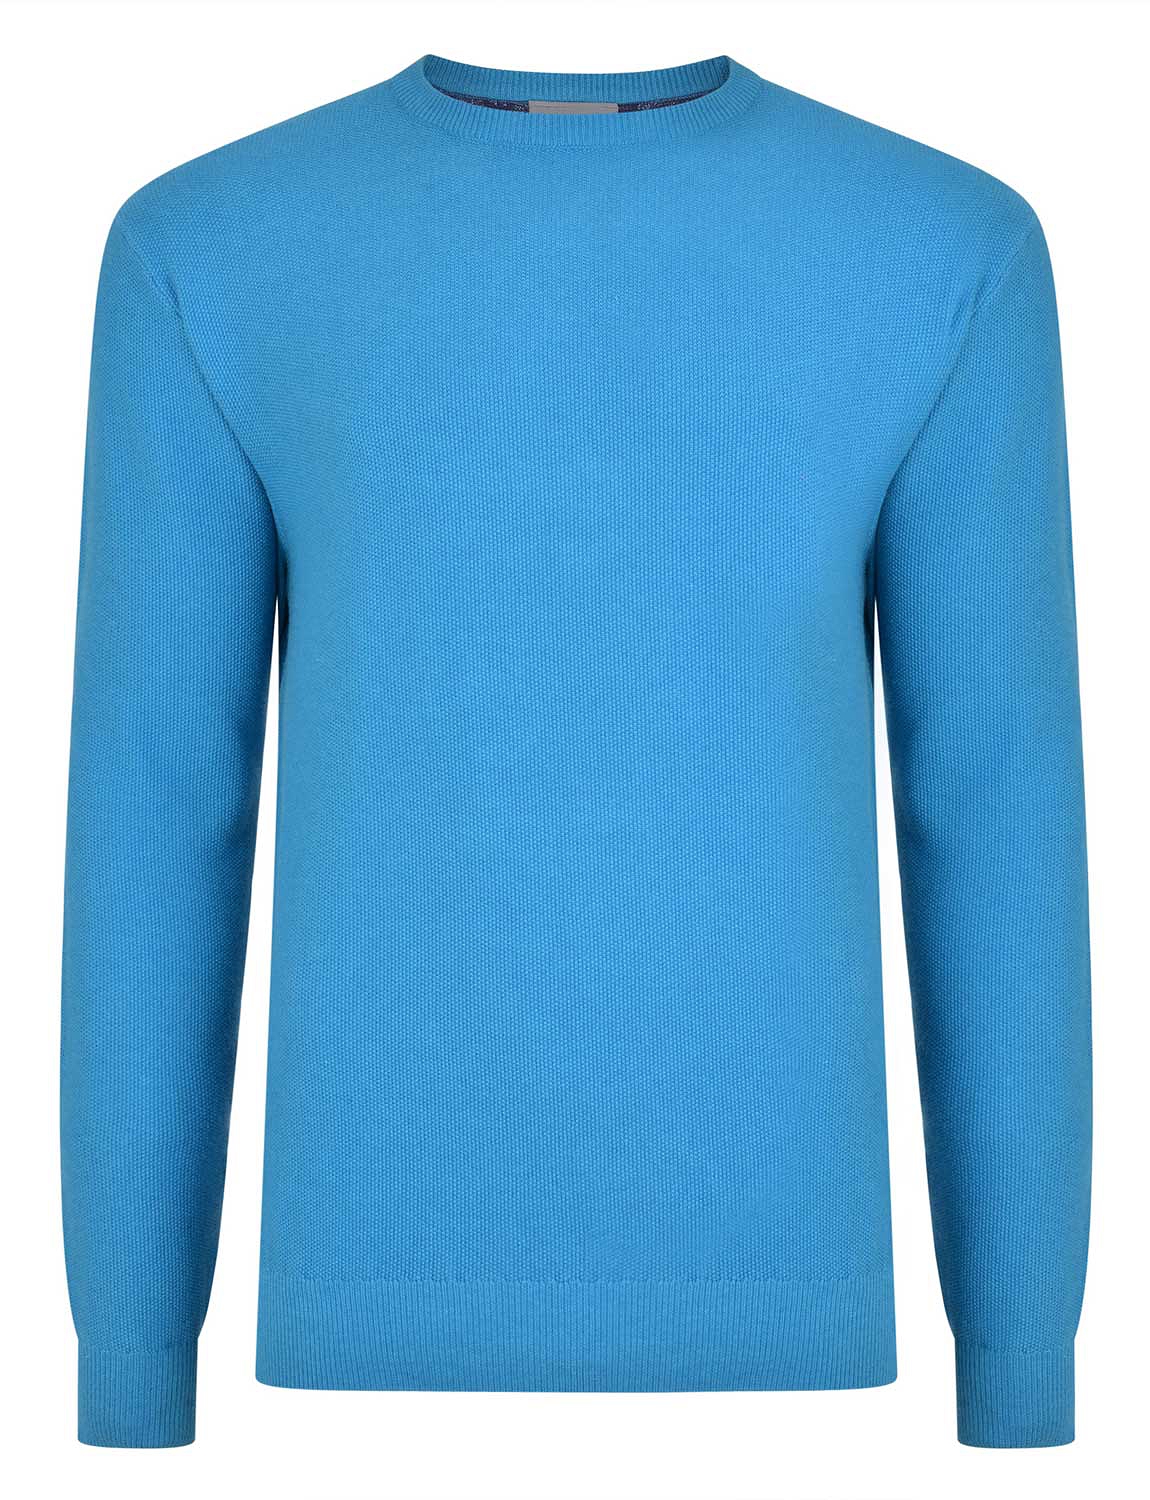 Peter Gribby Crew Neck Cotton Jumper | Chums